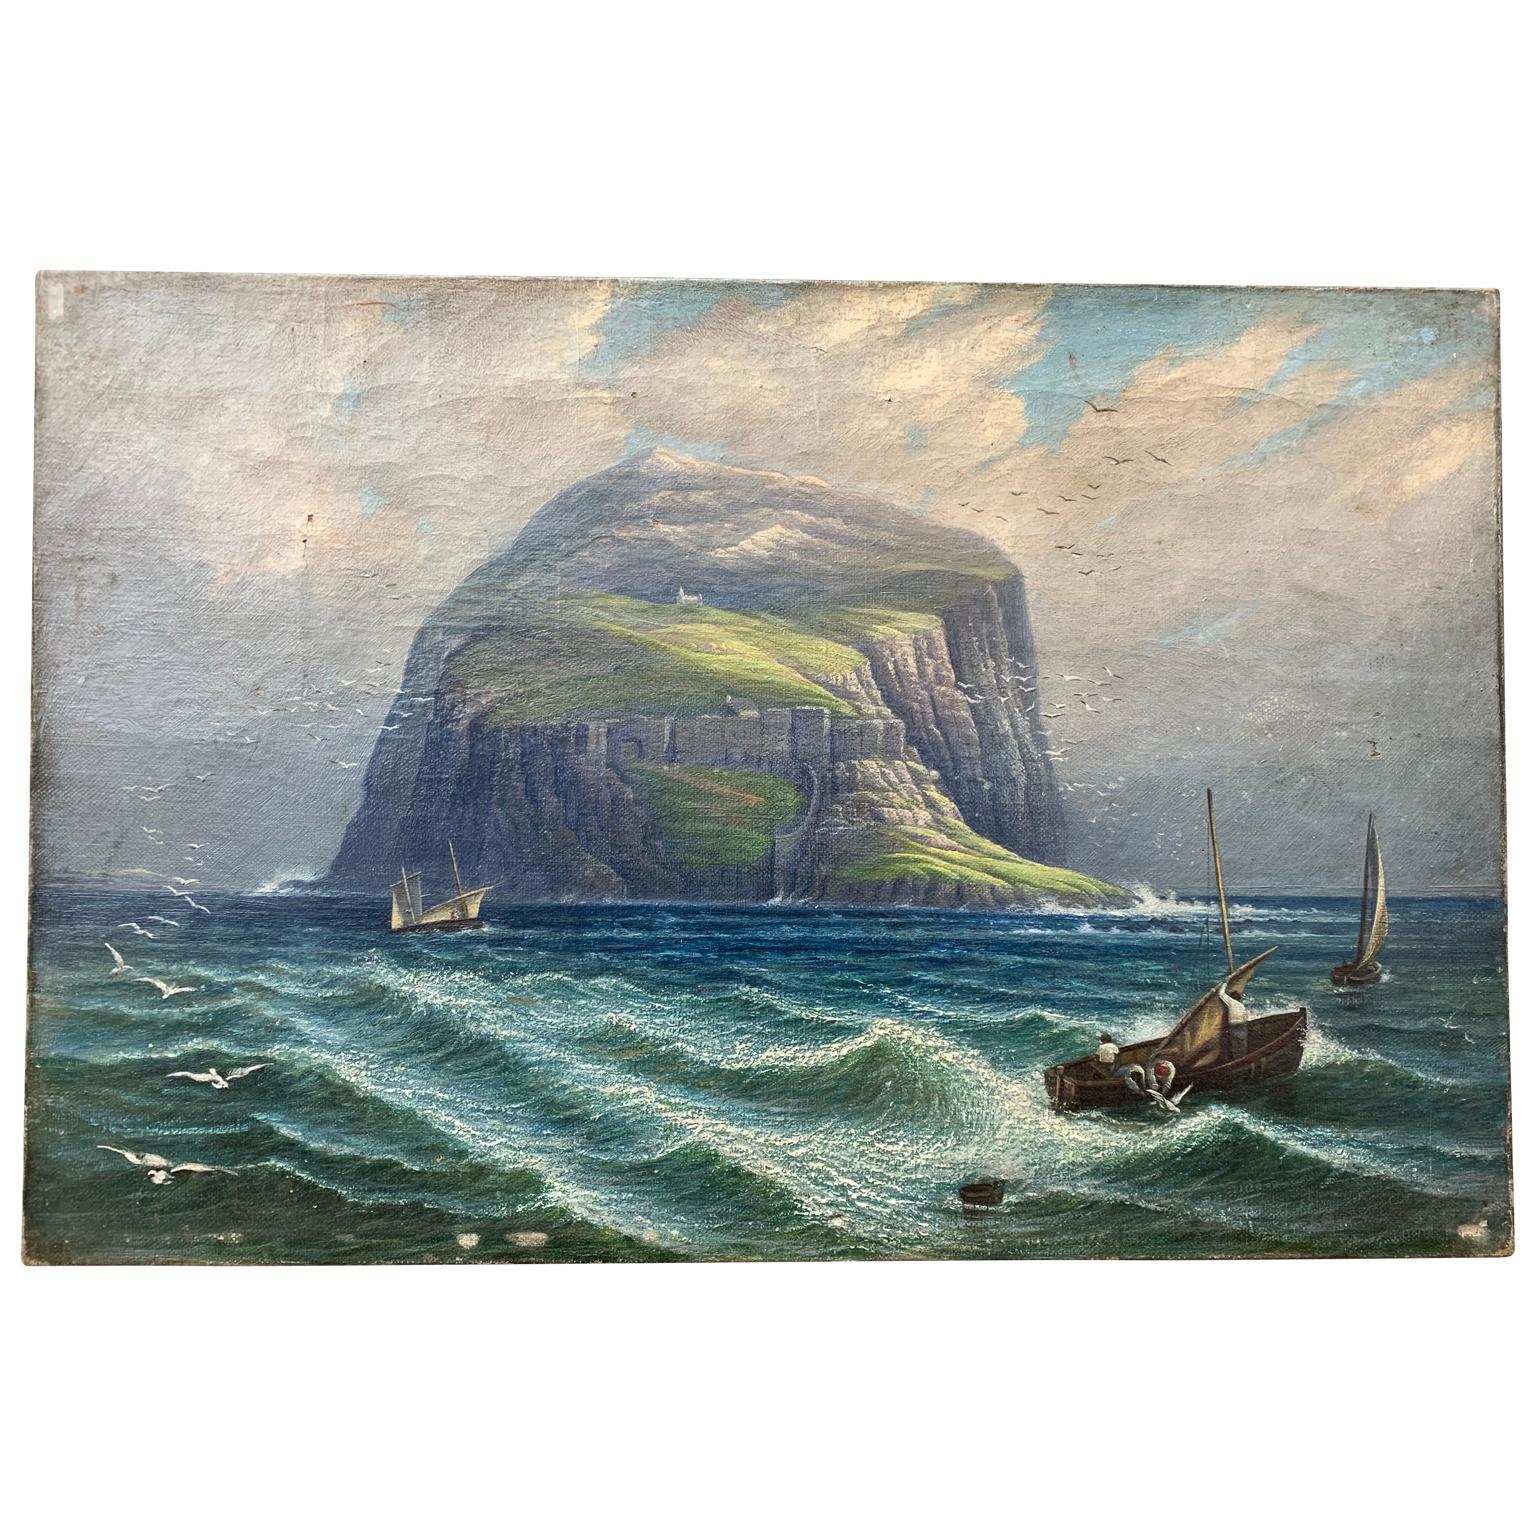 A 19th century oil painting on canvas representing a rocky island, coastline and sailing boats.